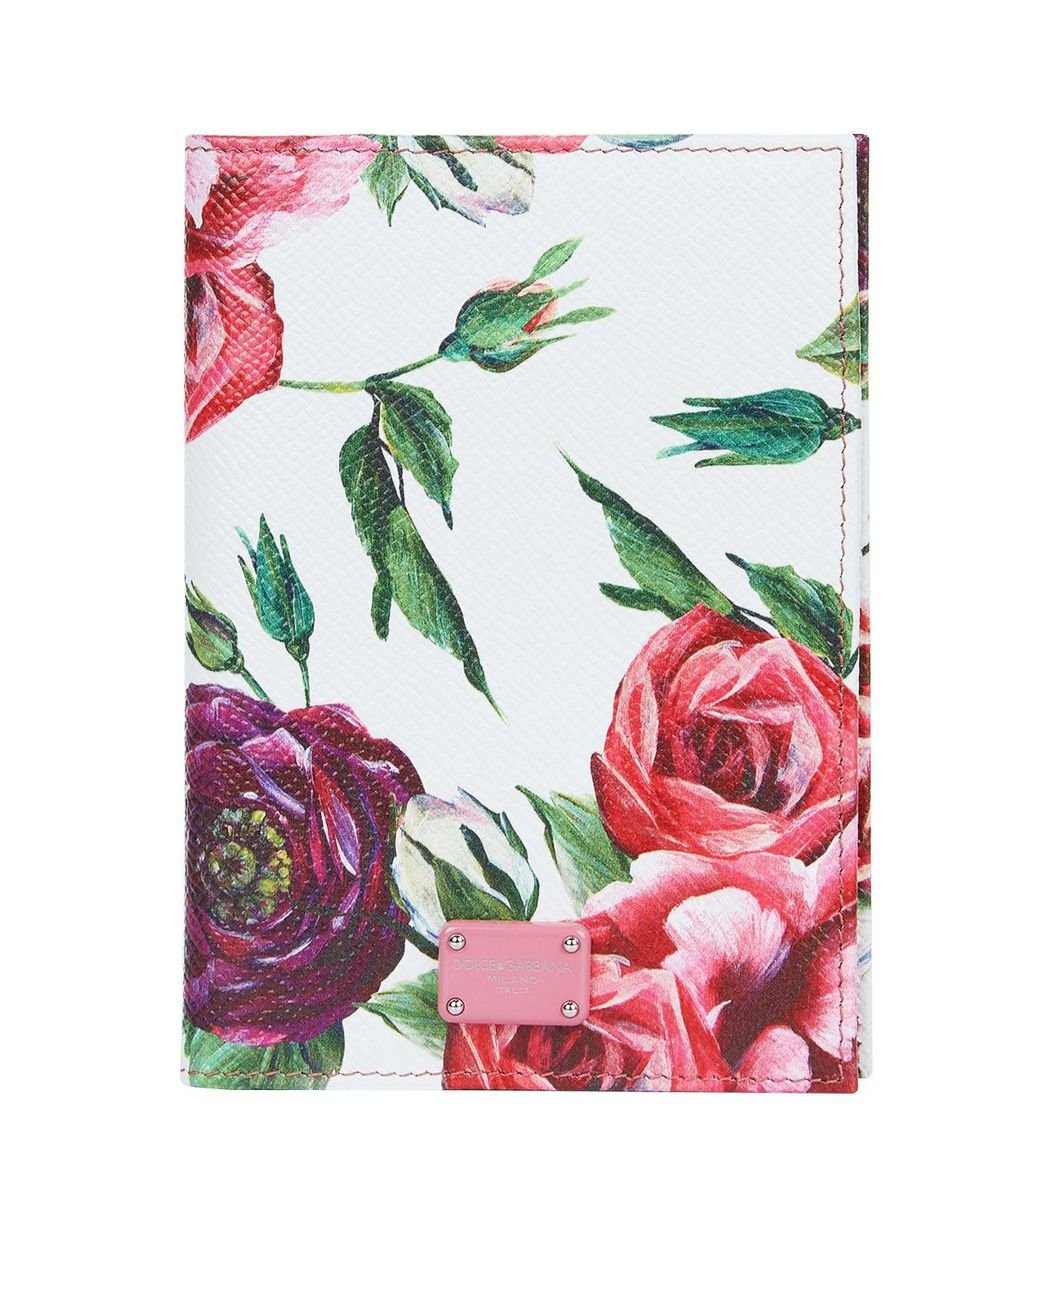 Pink With Flowers Passport ID Card Holder -  Norway